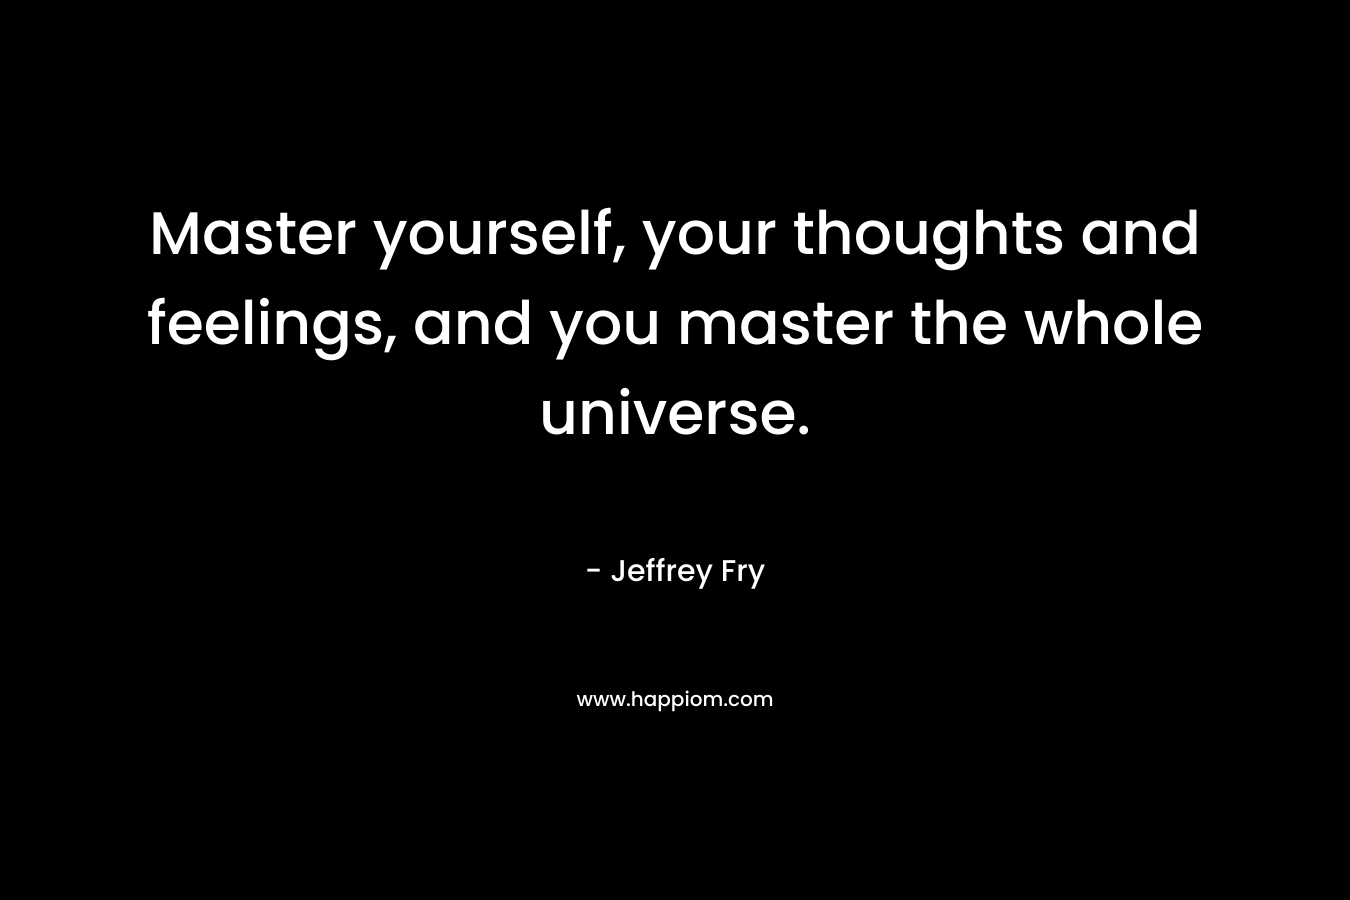 Master yourself, your thoughts and feelings, and you master the whole universe.